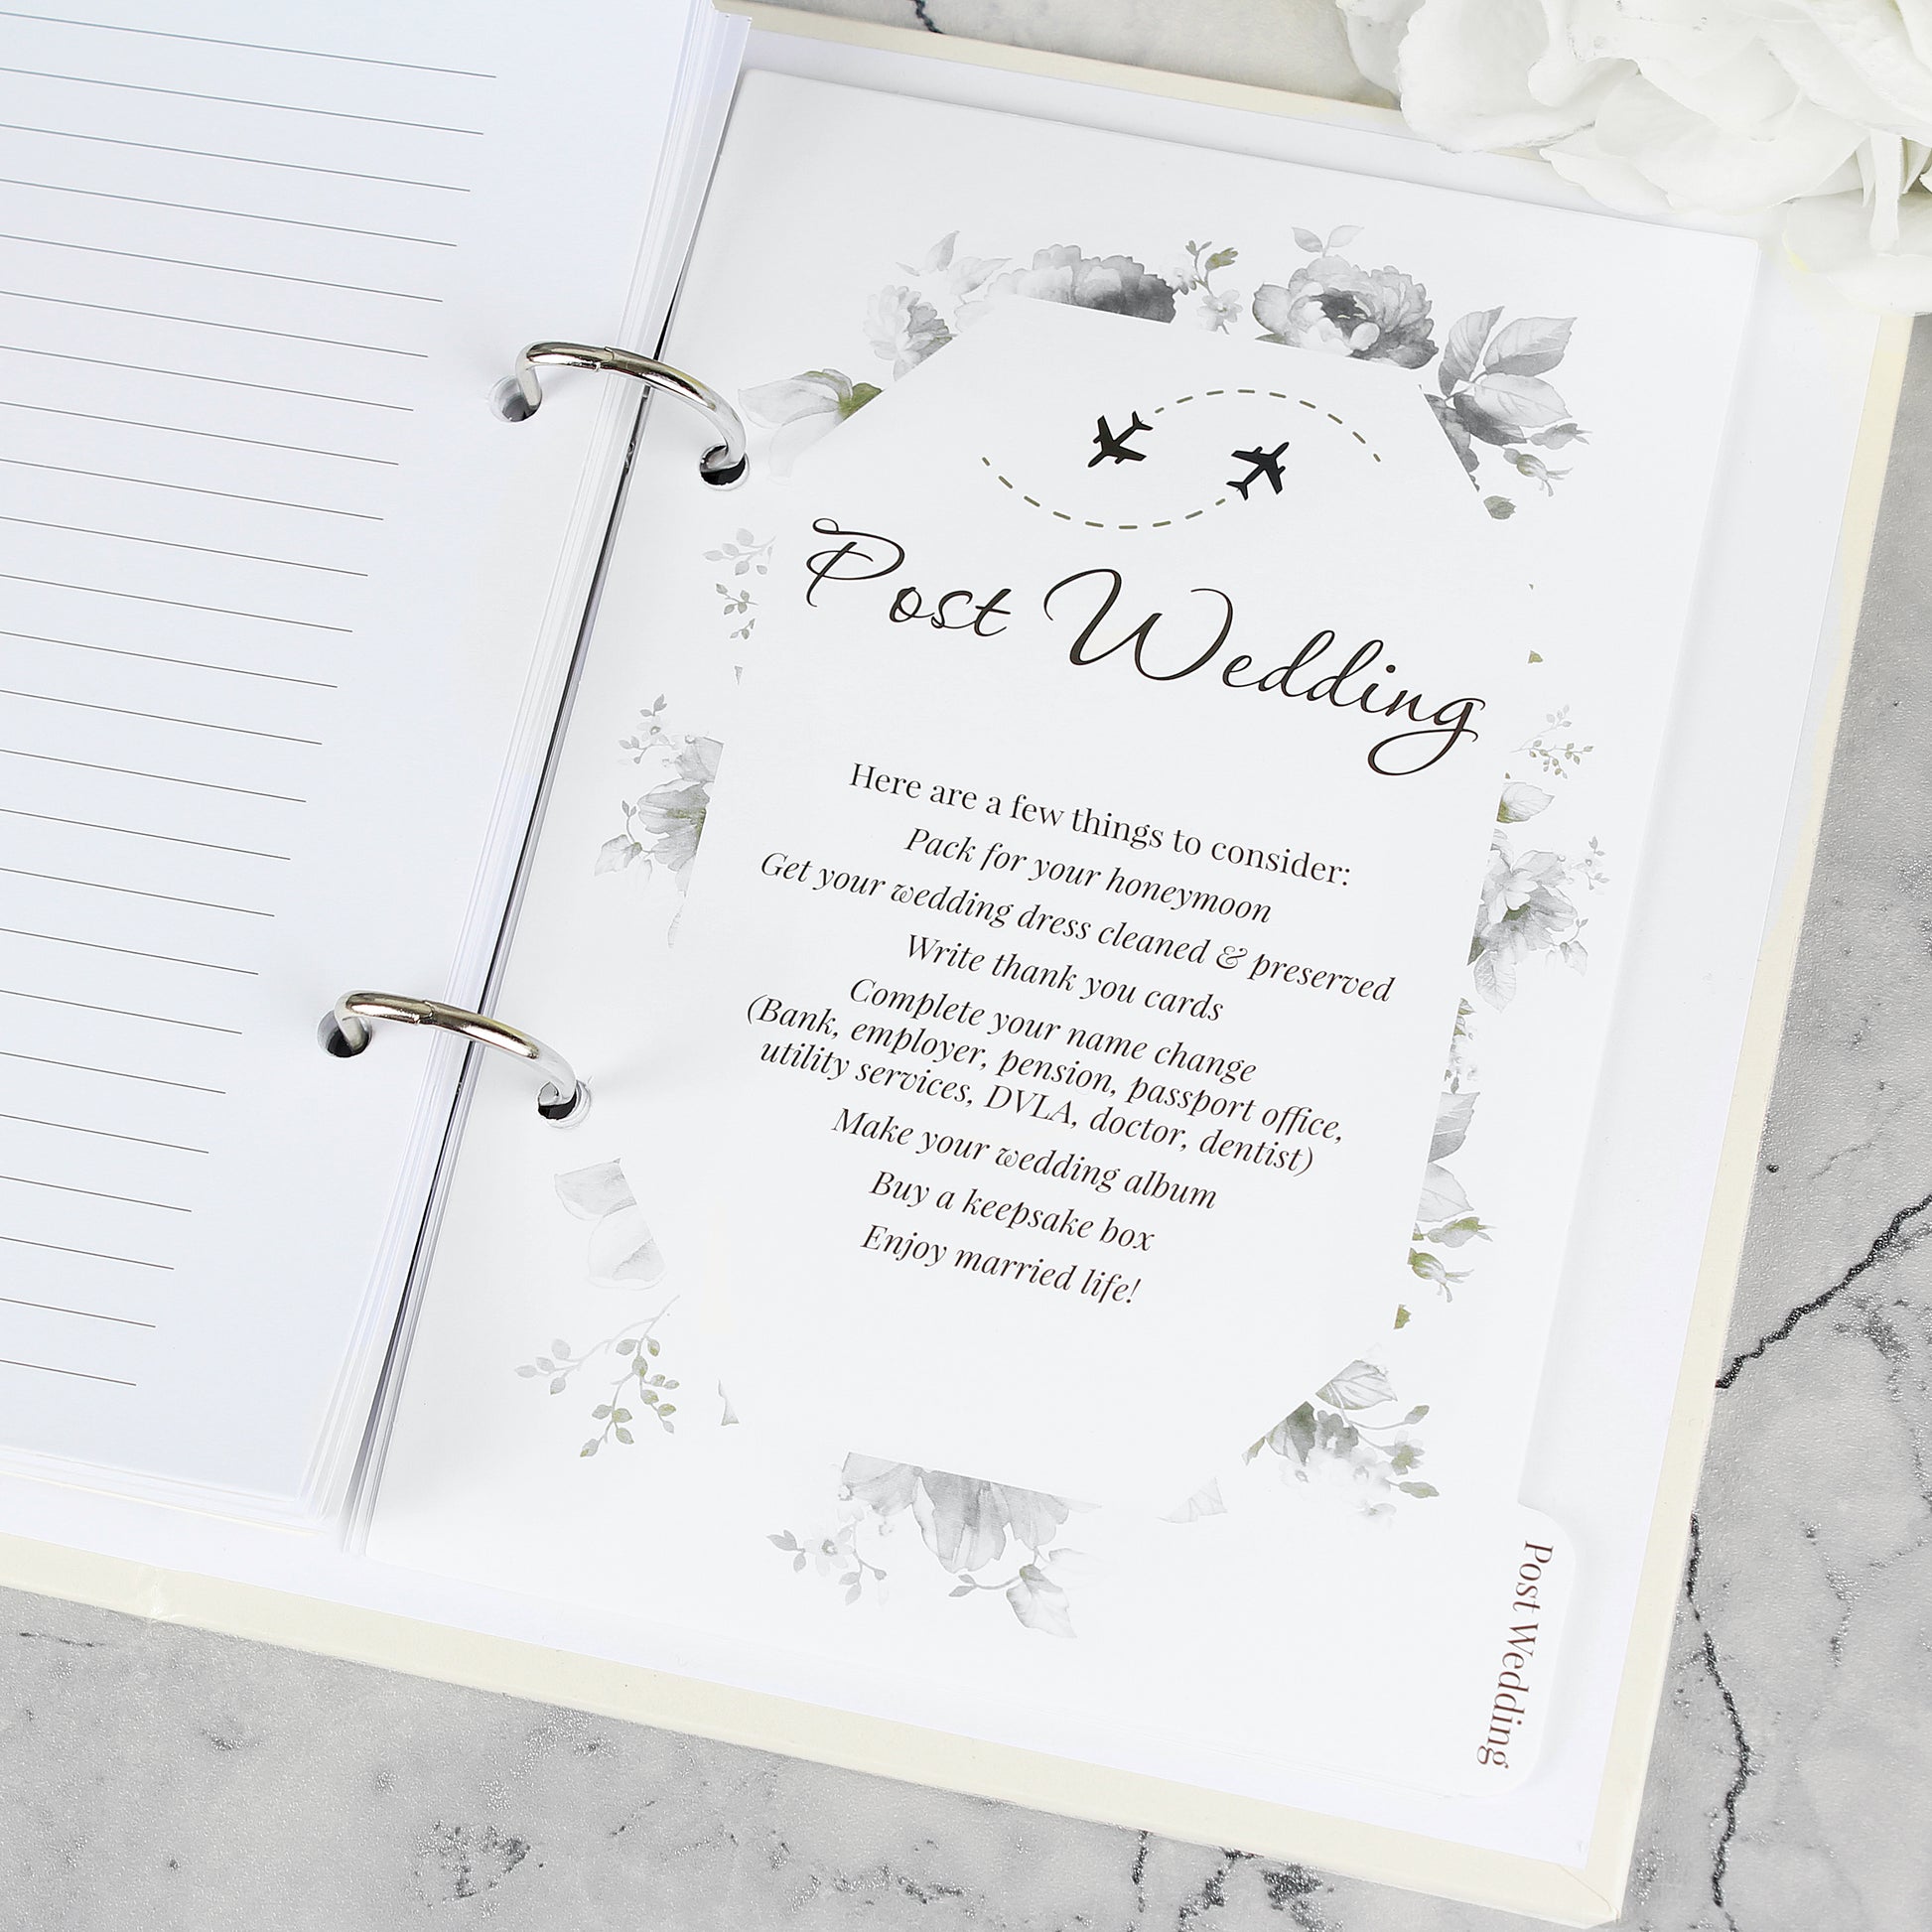 SLove, Laughter and happily ever after wedding planner, personalised with the couple's first names. A ring bound planner with lots of useful content. showing Post Wedding checklist in planner